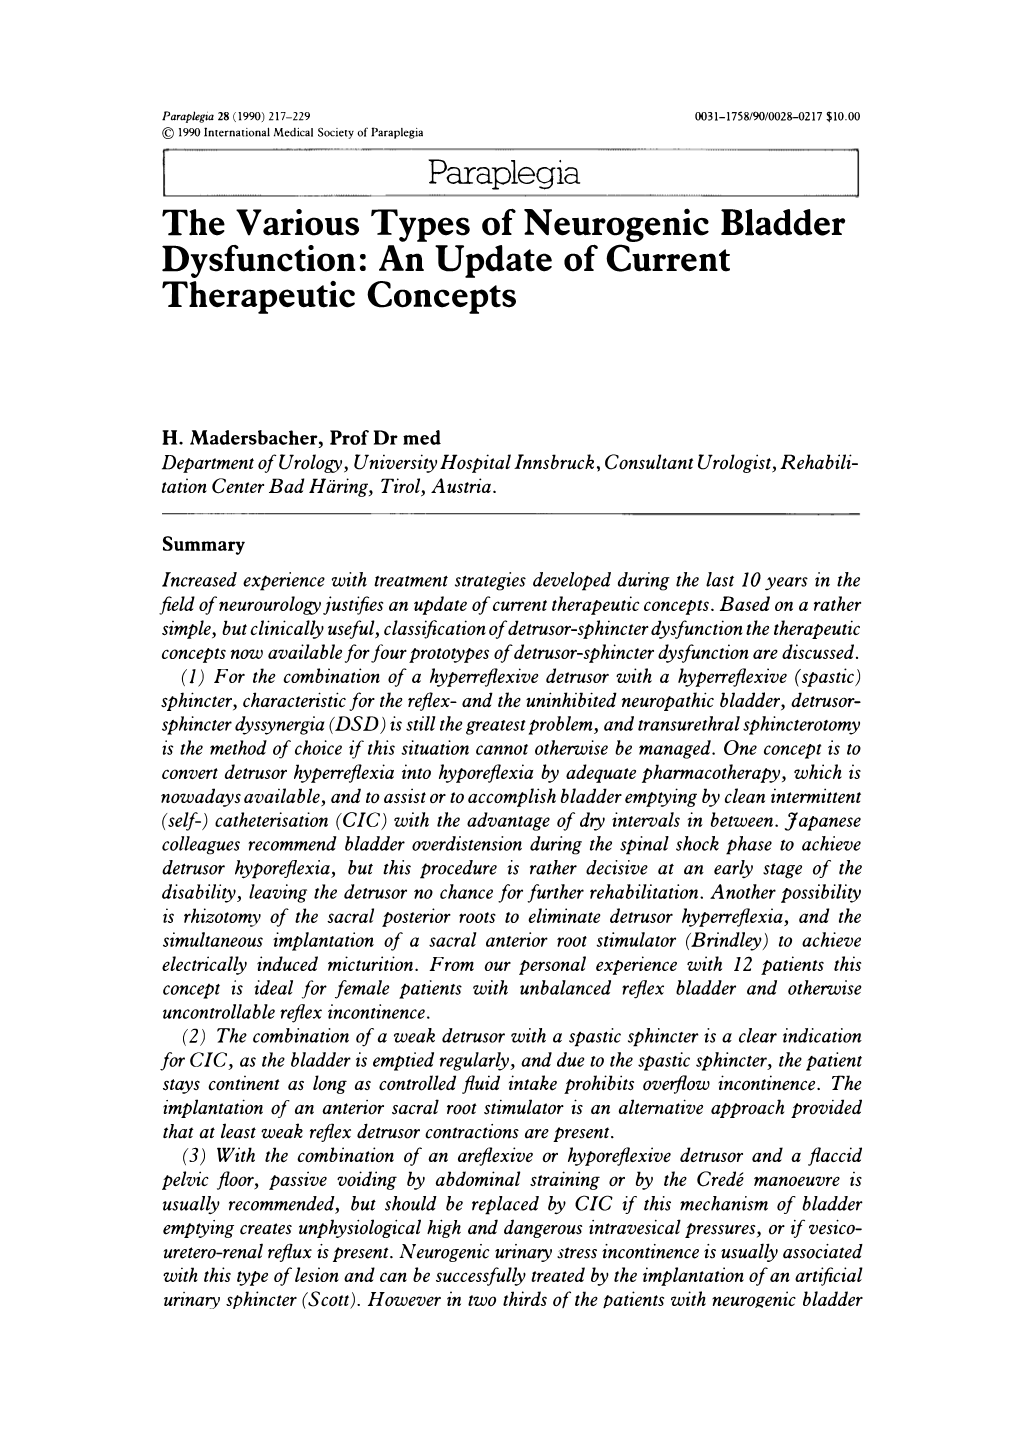 The Various Types of Neurogenic Bladder Dysfunction: an Update of Current Therapeutic Concepts